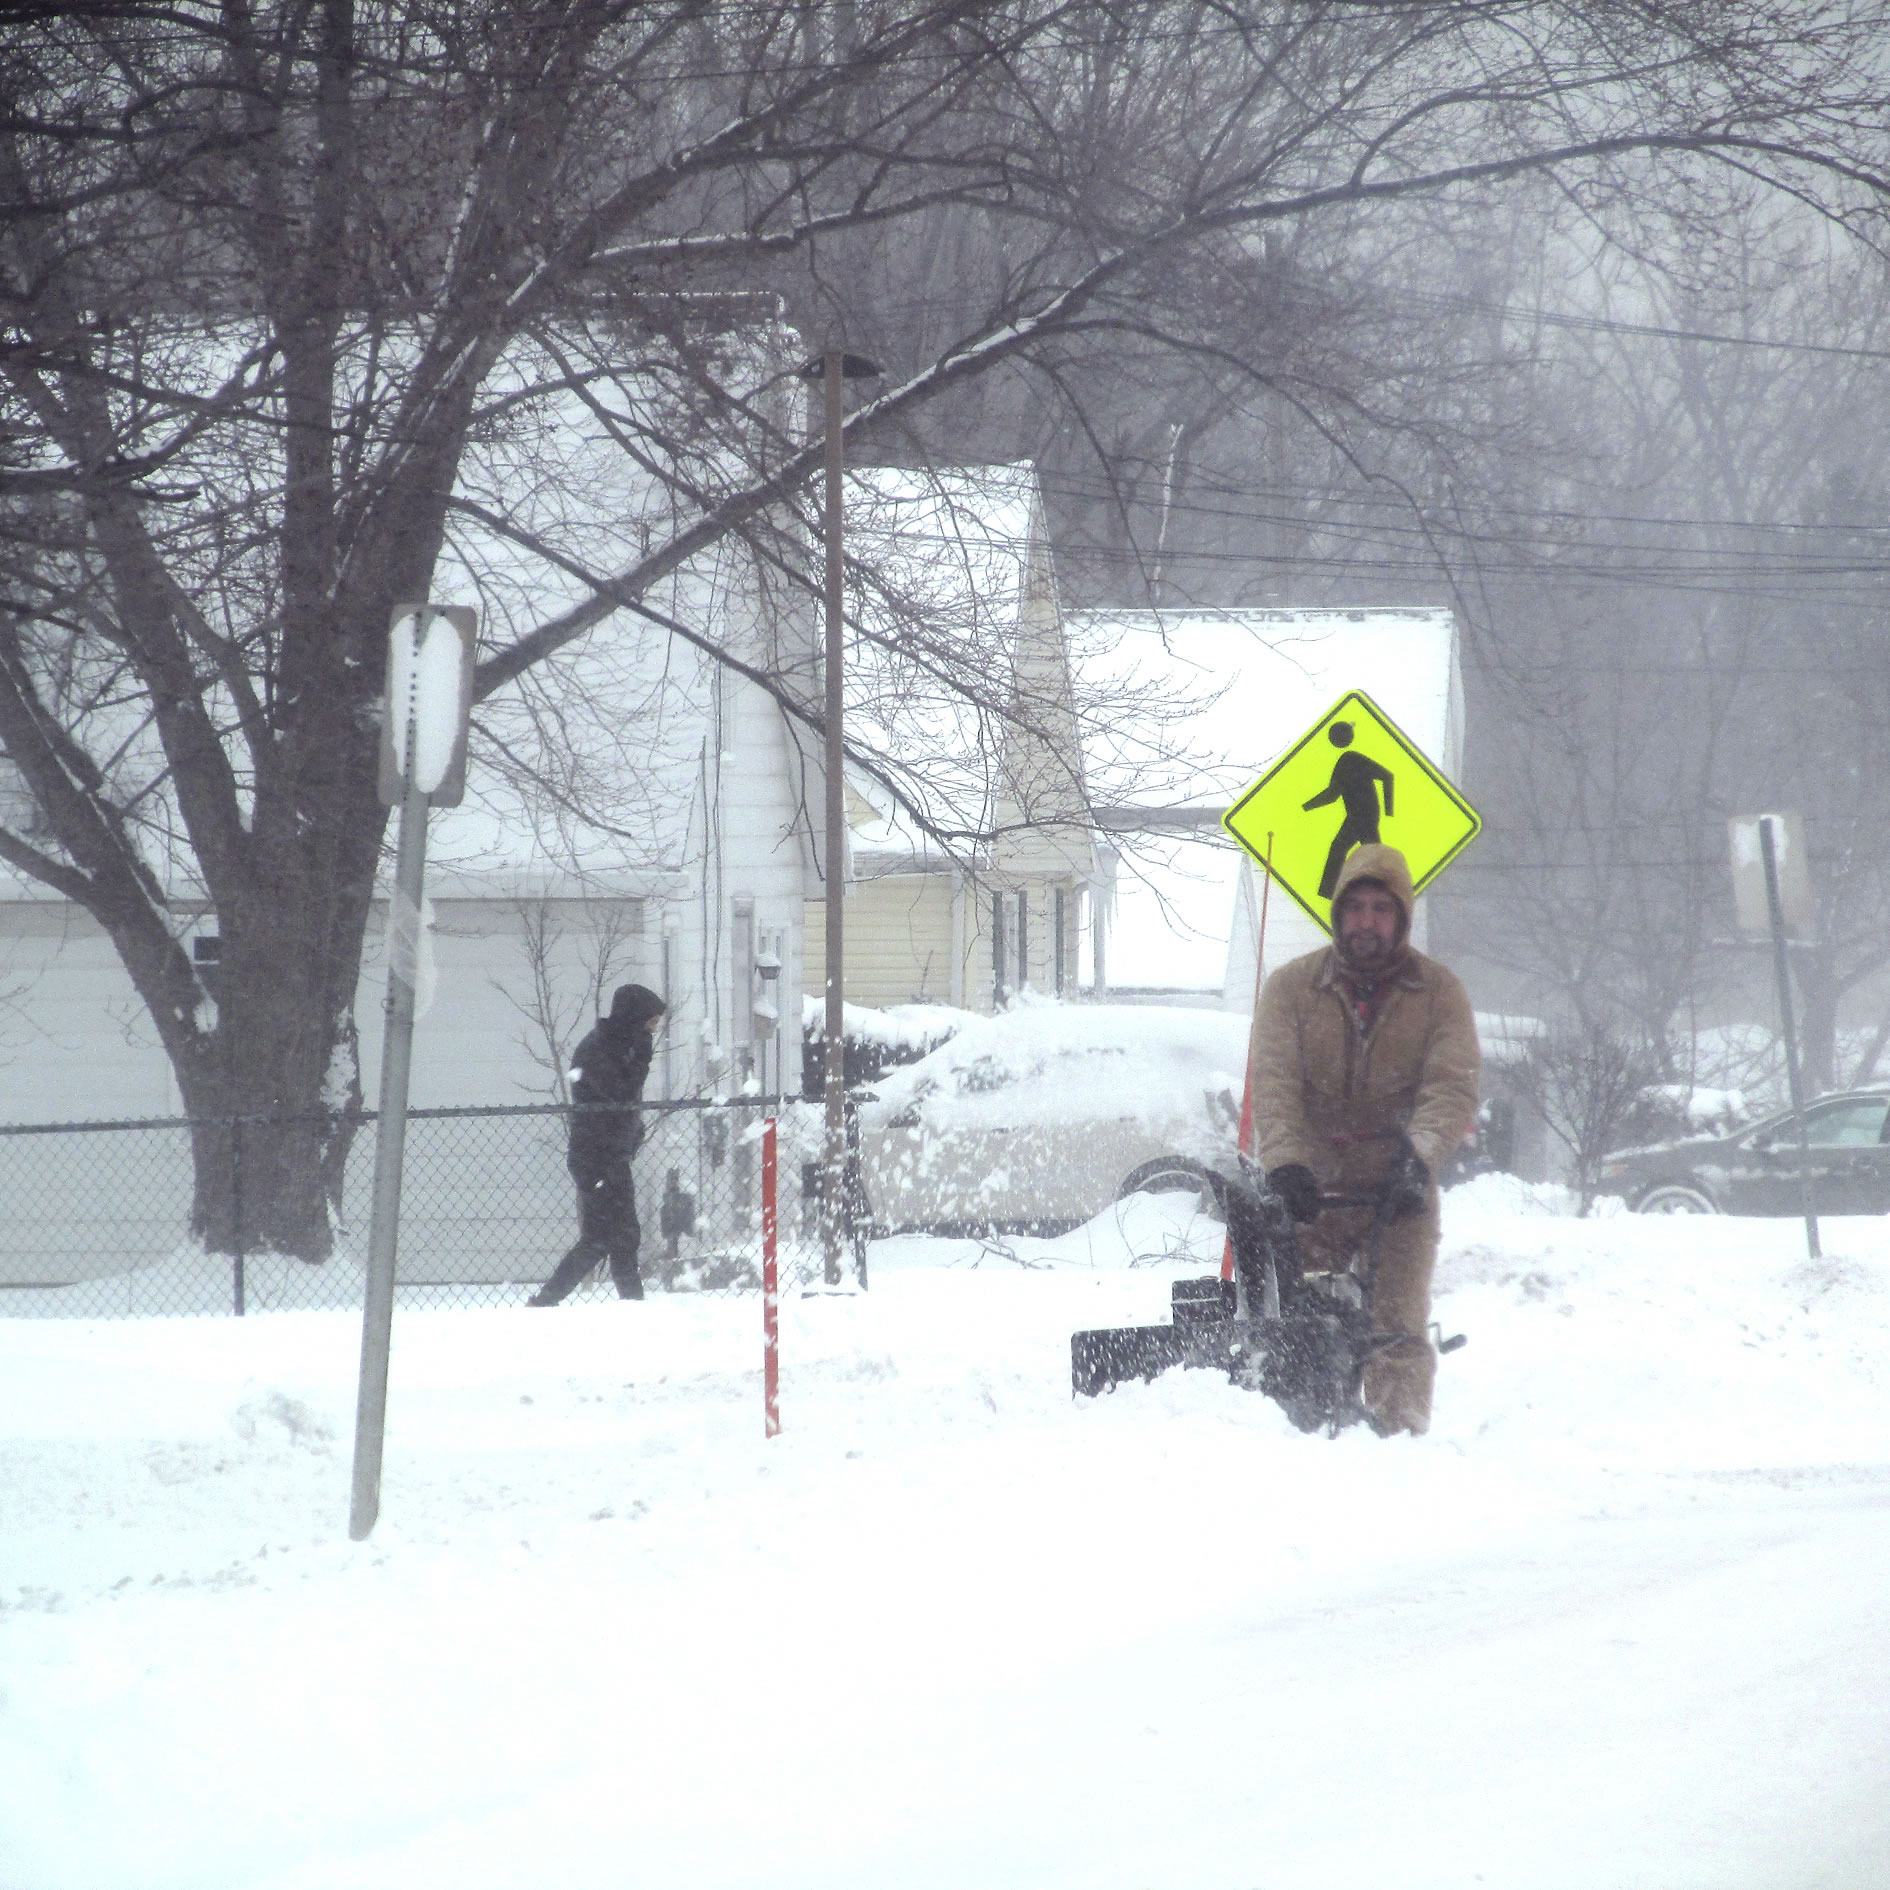 In this Tuesday, Dec. 26, 2017 photo, a man uses a snow blower to dig out after heavy snow fell in Dunkirk, N.Y. The National Weather Service said that strong westerly winds over Lake Erie picked up moisture, developed into snow and converged with opposing winds, dumping snow in a band along the shore from Ohio to New York.